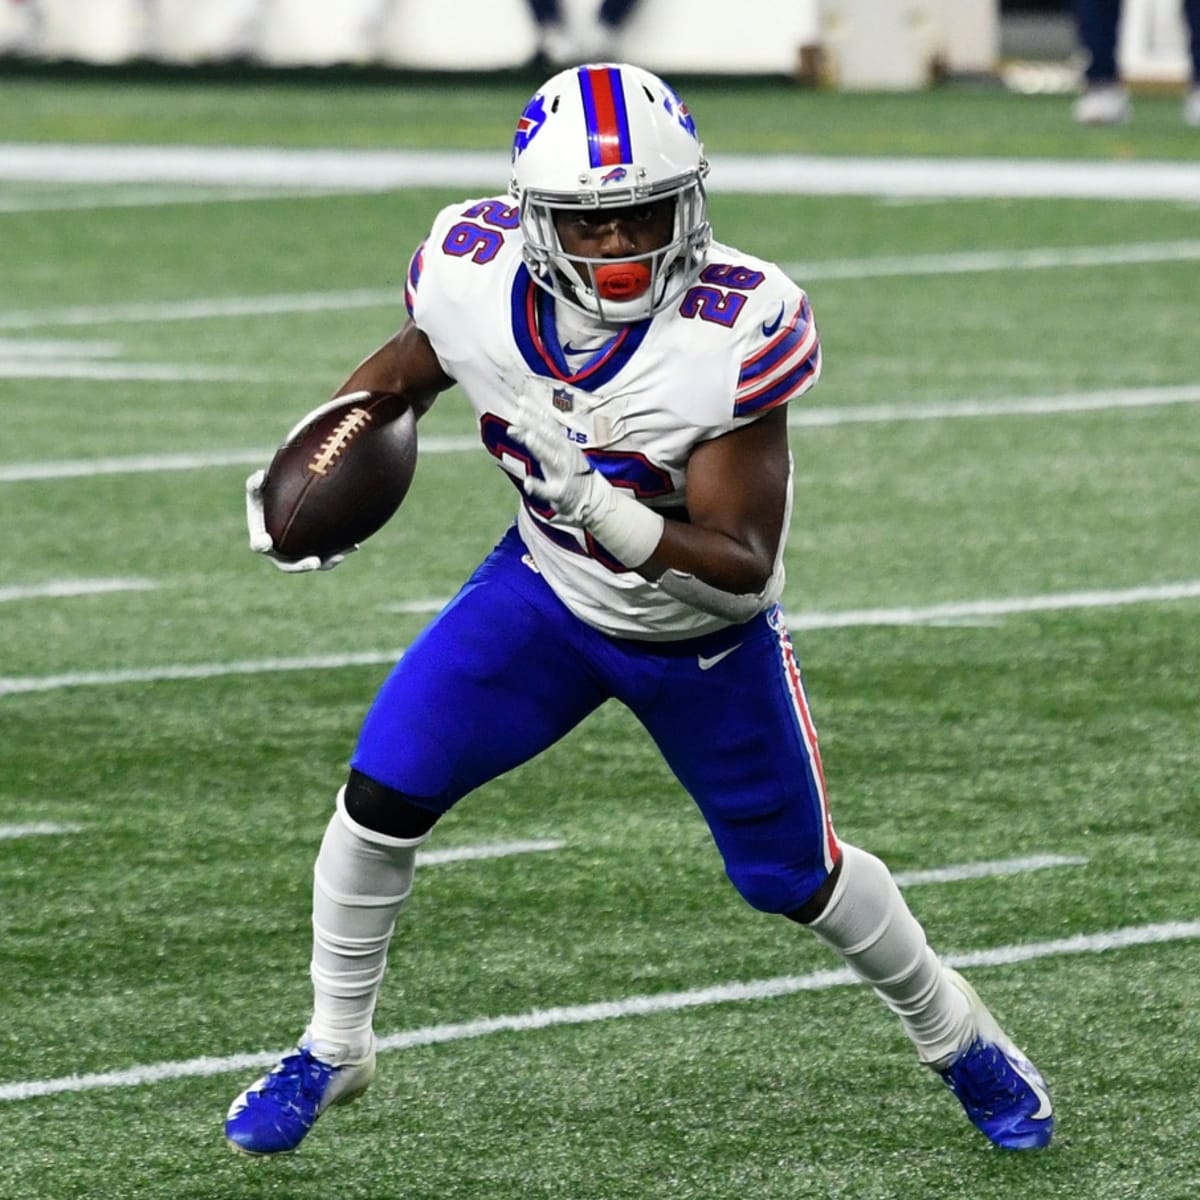 What impact will James Cook have on Devin Singletary's fantasy production?